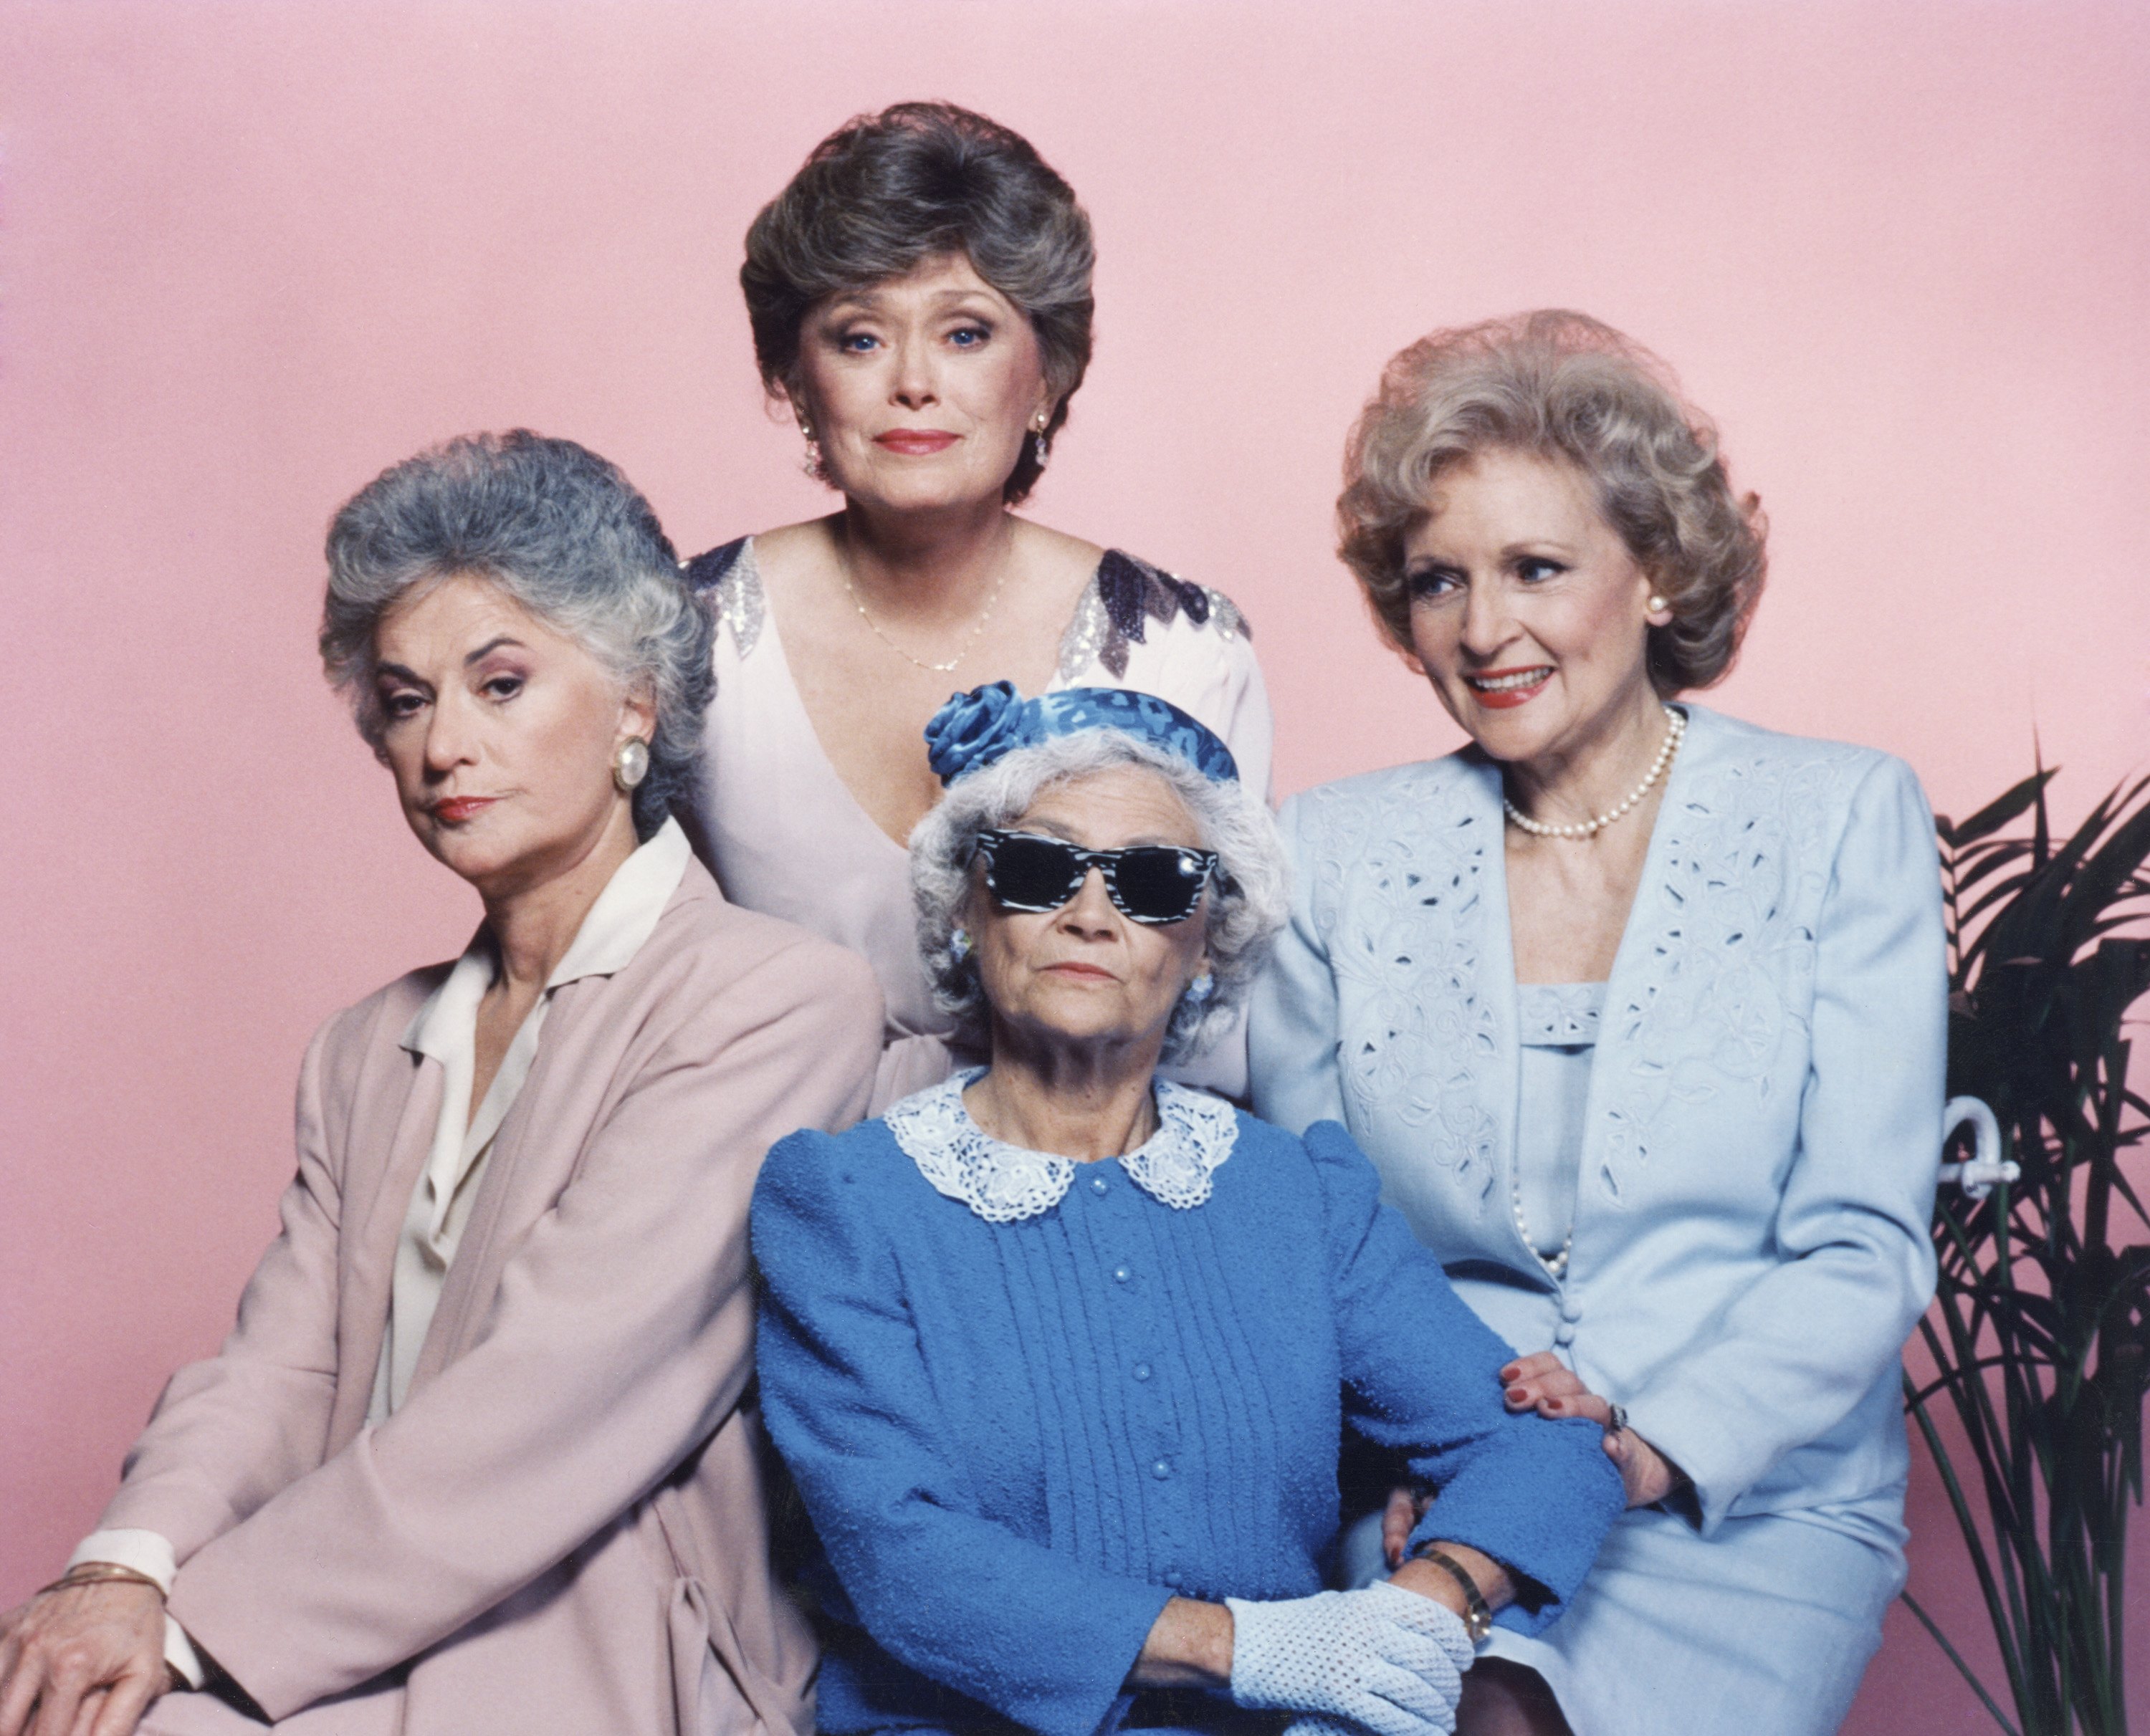 Bea Arthur, Rue McClanahan, Estelle Getty, and Betty White pose for a picture as 'The Golden Girls.'